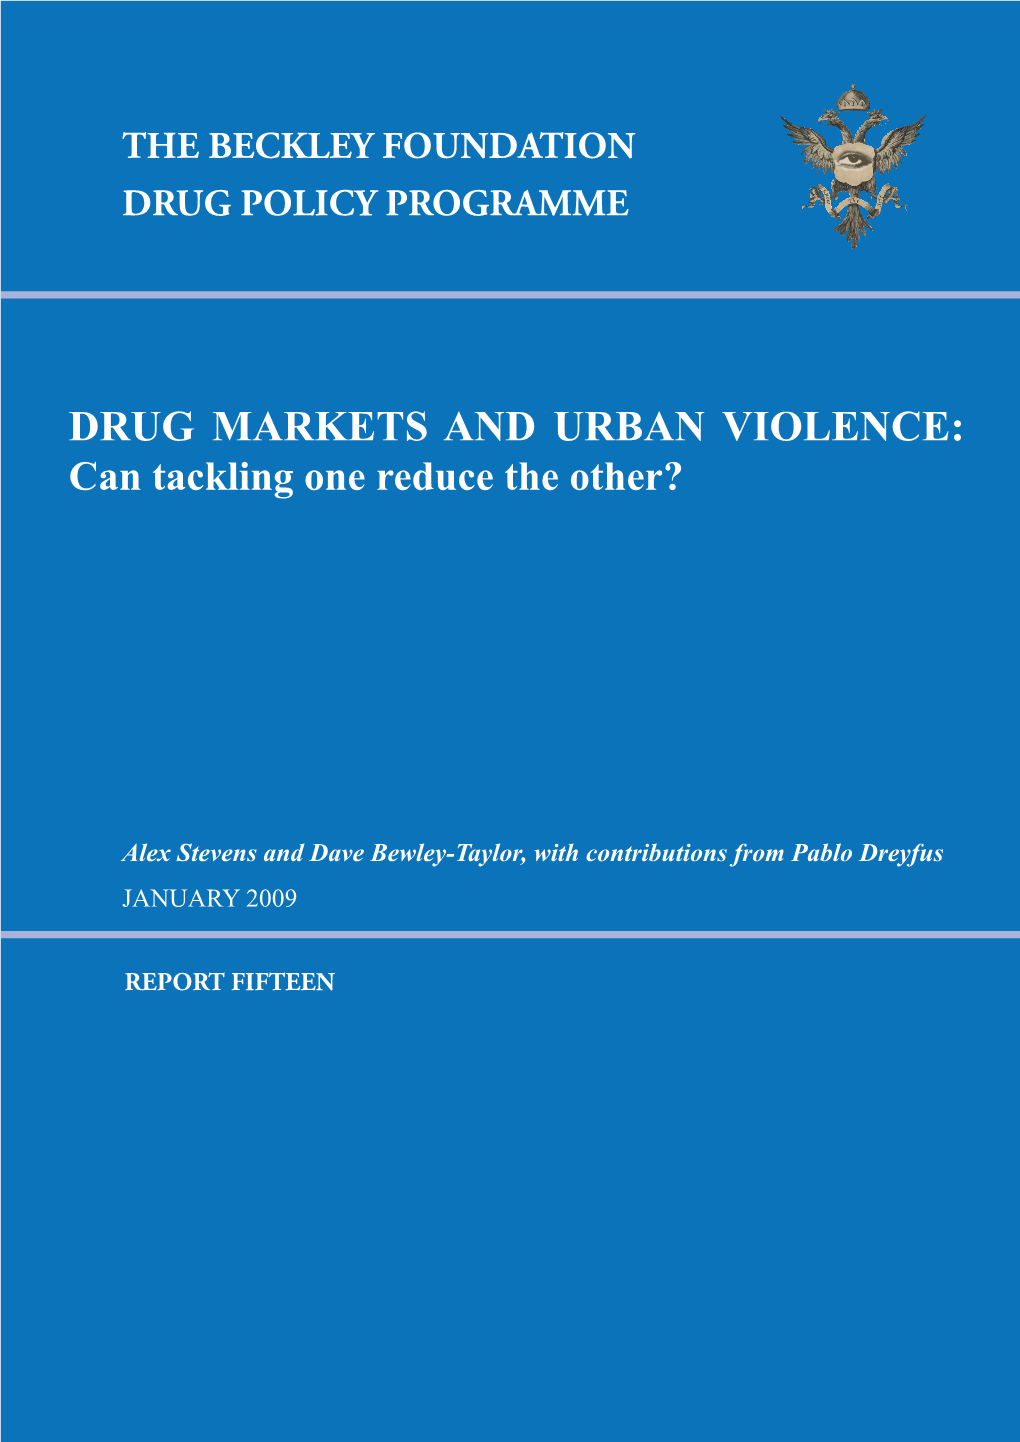 DRUG MARKETS and URBAN VIOLENCE: Can Tackling One Reduce the Other?